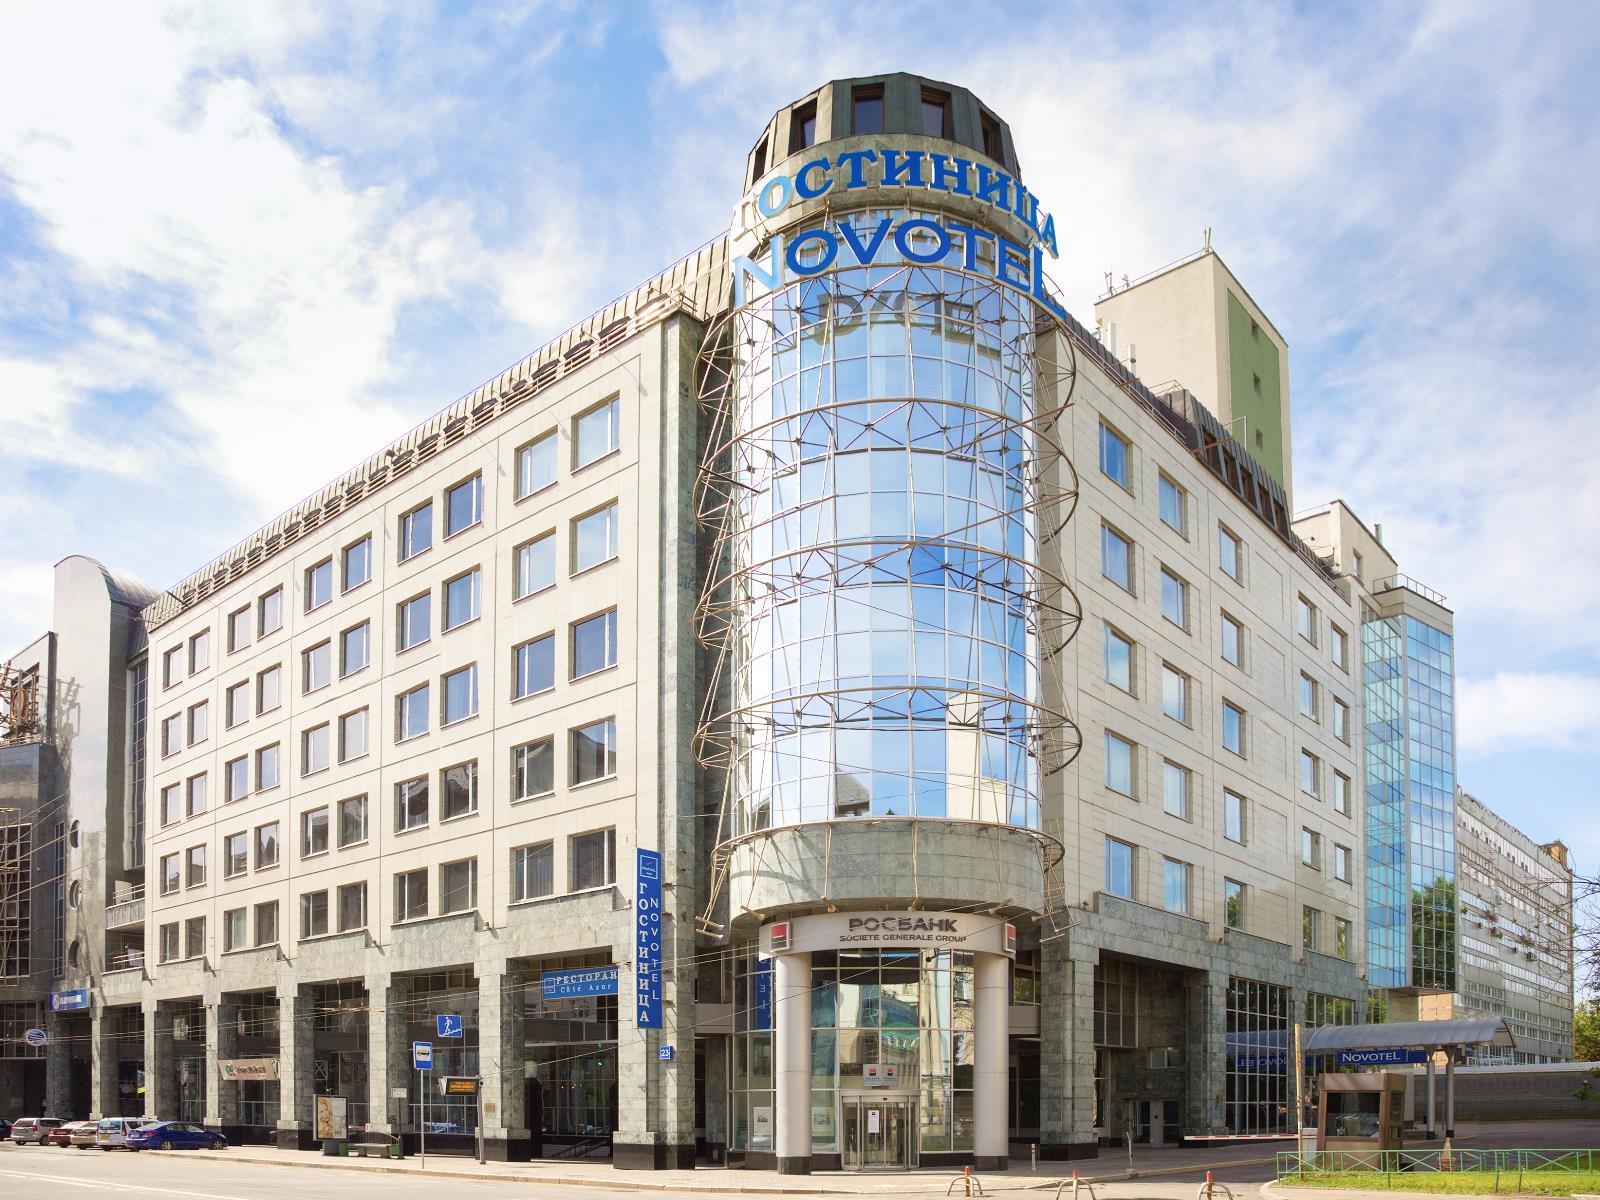 Novotel Moscow Centre Hotel Russia FAQ 2016, What facilities are there in Novotel Moscow Centre Hotel Russia 2016, What Languages Spoken are Supported in Novotel Moscow Centre Hotel Russia 2016, Which payment cards are accepted in Novotel Moscow Centre Hotel Russia , Russia Novotel Moscow Centre Hotel room facilities and services Q&A 2016, Russia Novotel Moscow Centre Hotel online booking services 2016, Russia Novotel Moscow Centre Hotel address 2016, Russia Novotel Moscow Centre Hotel telephone number 2016,Russia Novotel Moscow Centre Hotel map 2016, Russia Novotel Moscow Centre Hotel traffic guide 2016, how to go Russia Novotel Moscow Centre Hotel, Russia Novotel Moscow Centre Hotel booking online 2016, Russia Novotel Moscow Centre Hotel room types 2016.